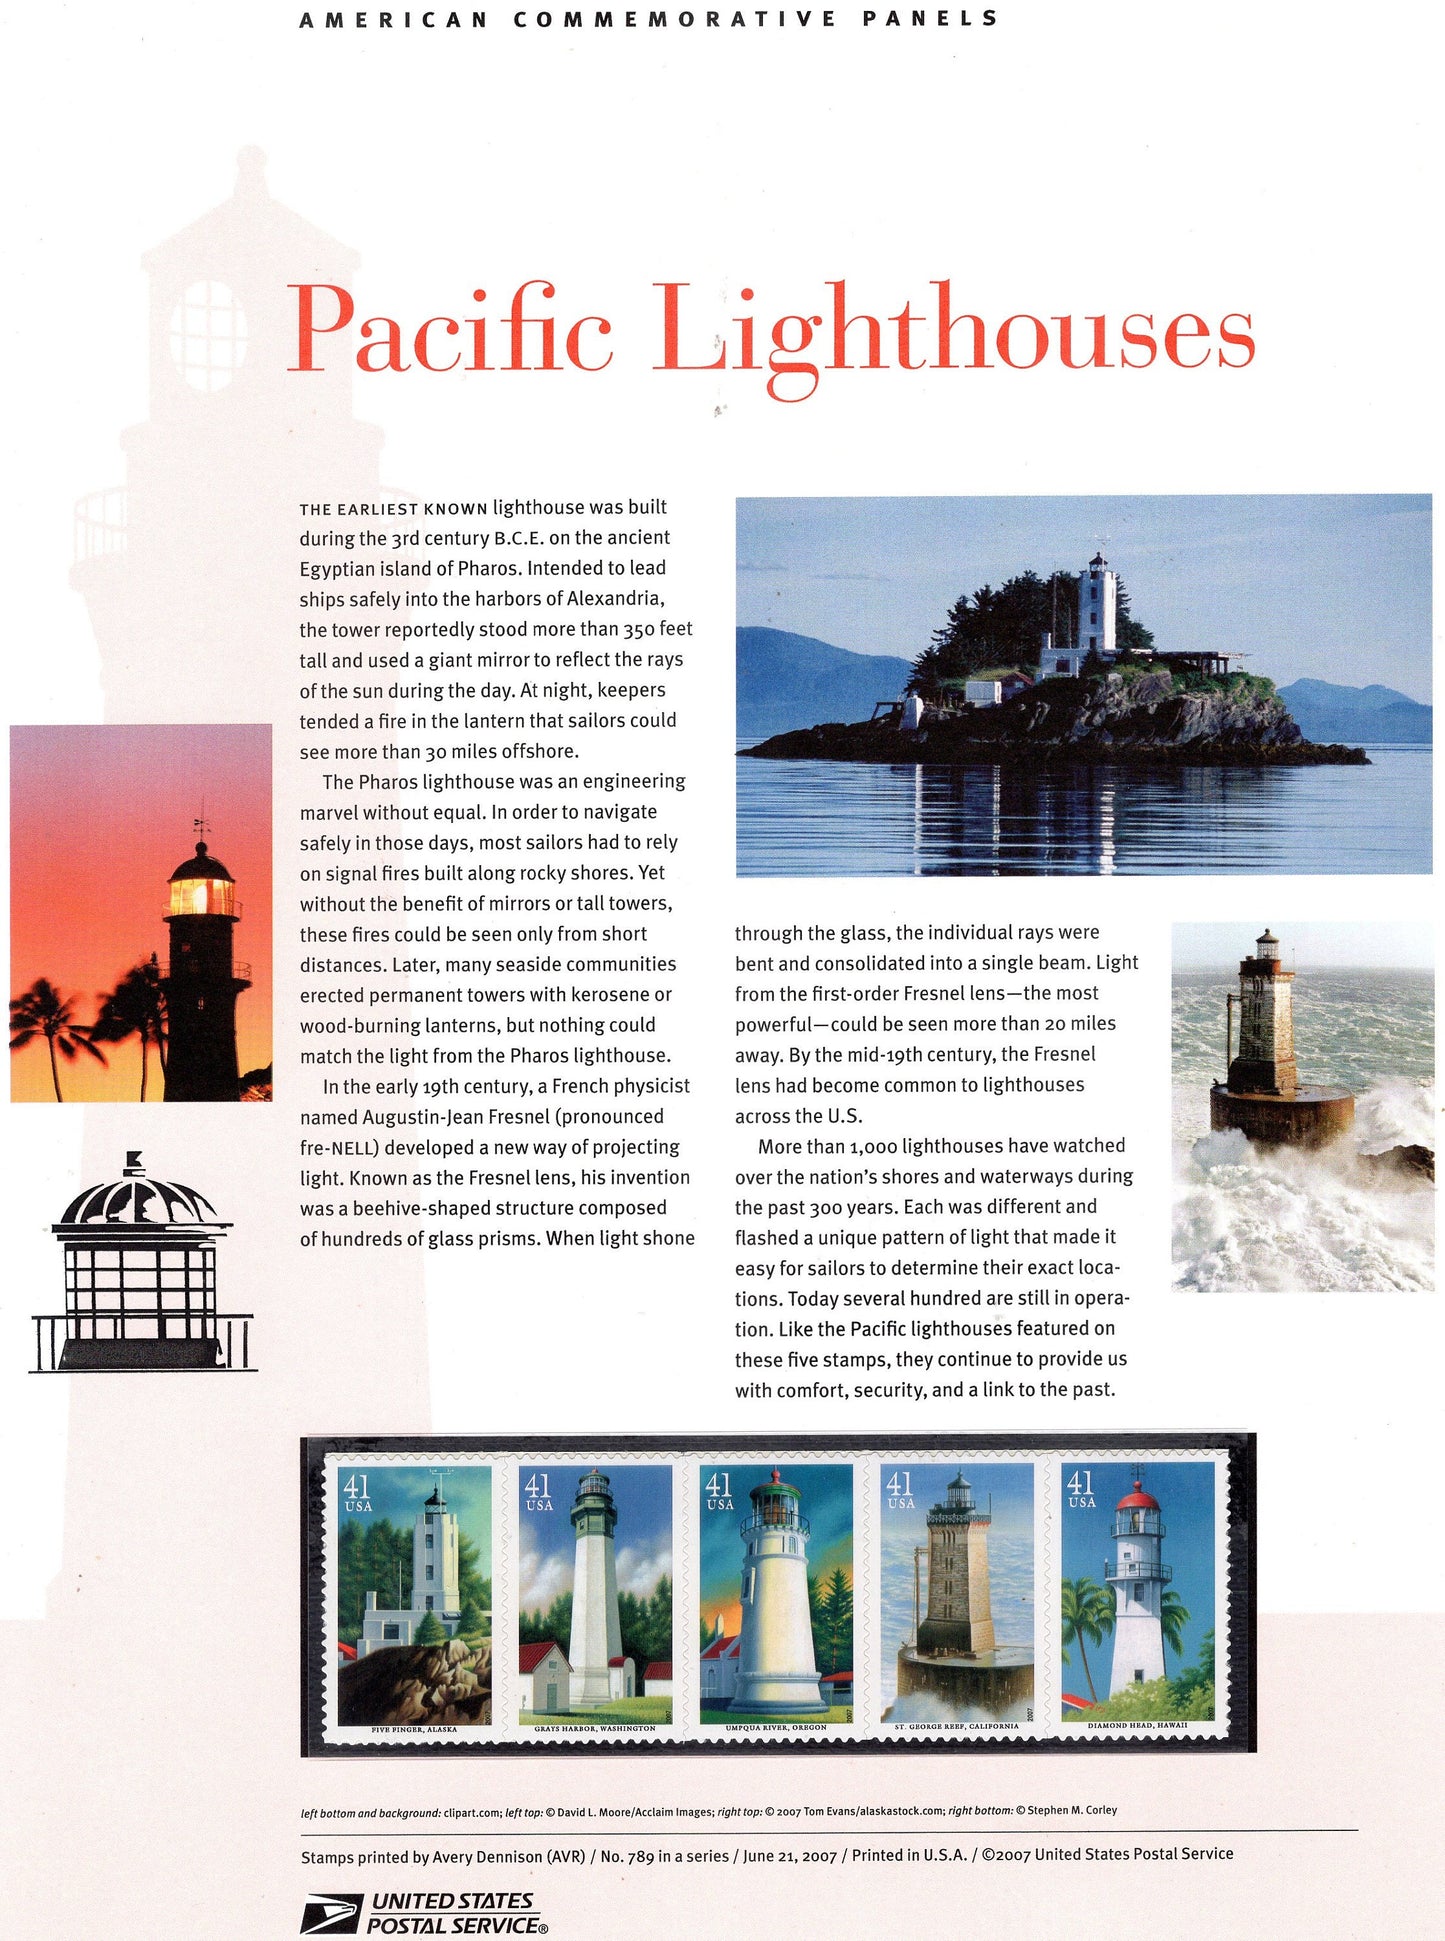 PACIFIC COAST LIGHTHOUSES Strip of 5 Commemorative Panel with 5 Stamps Illustrations plus Text – A Great Gift 8.5x11-2007 -